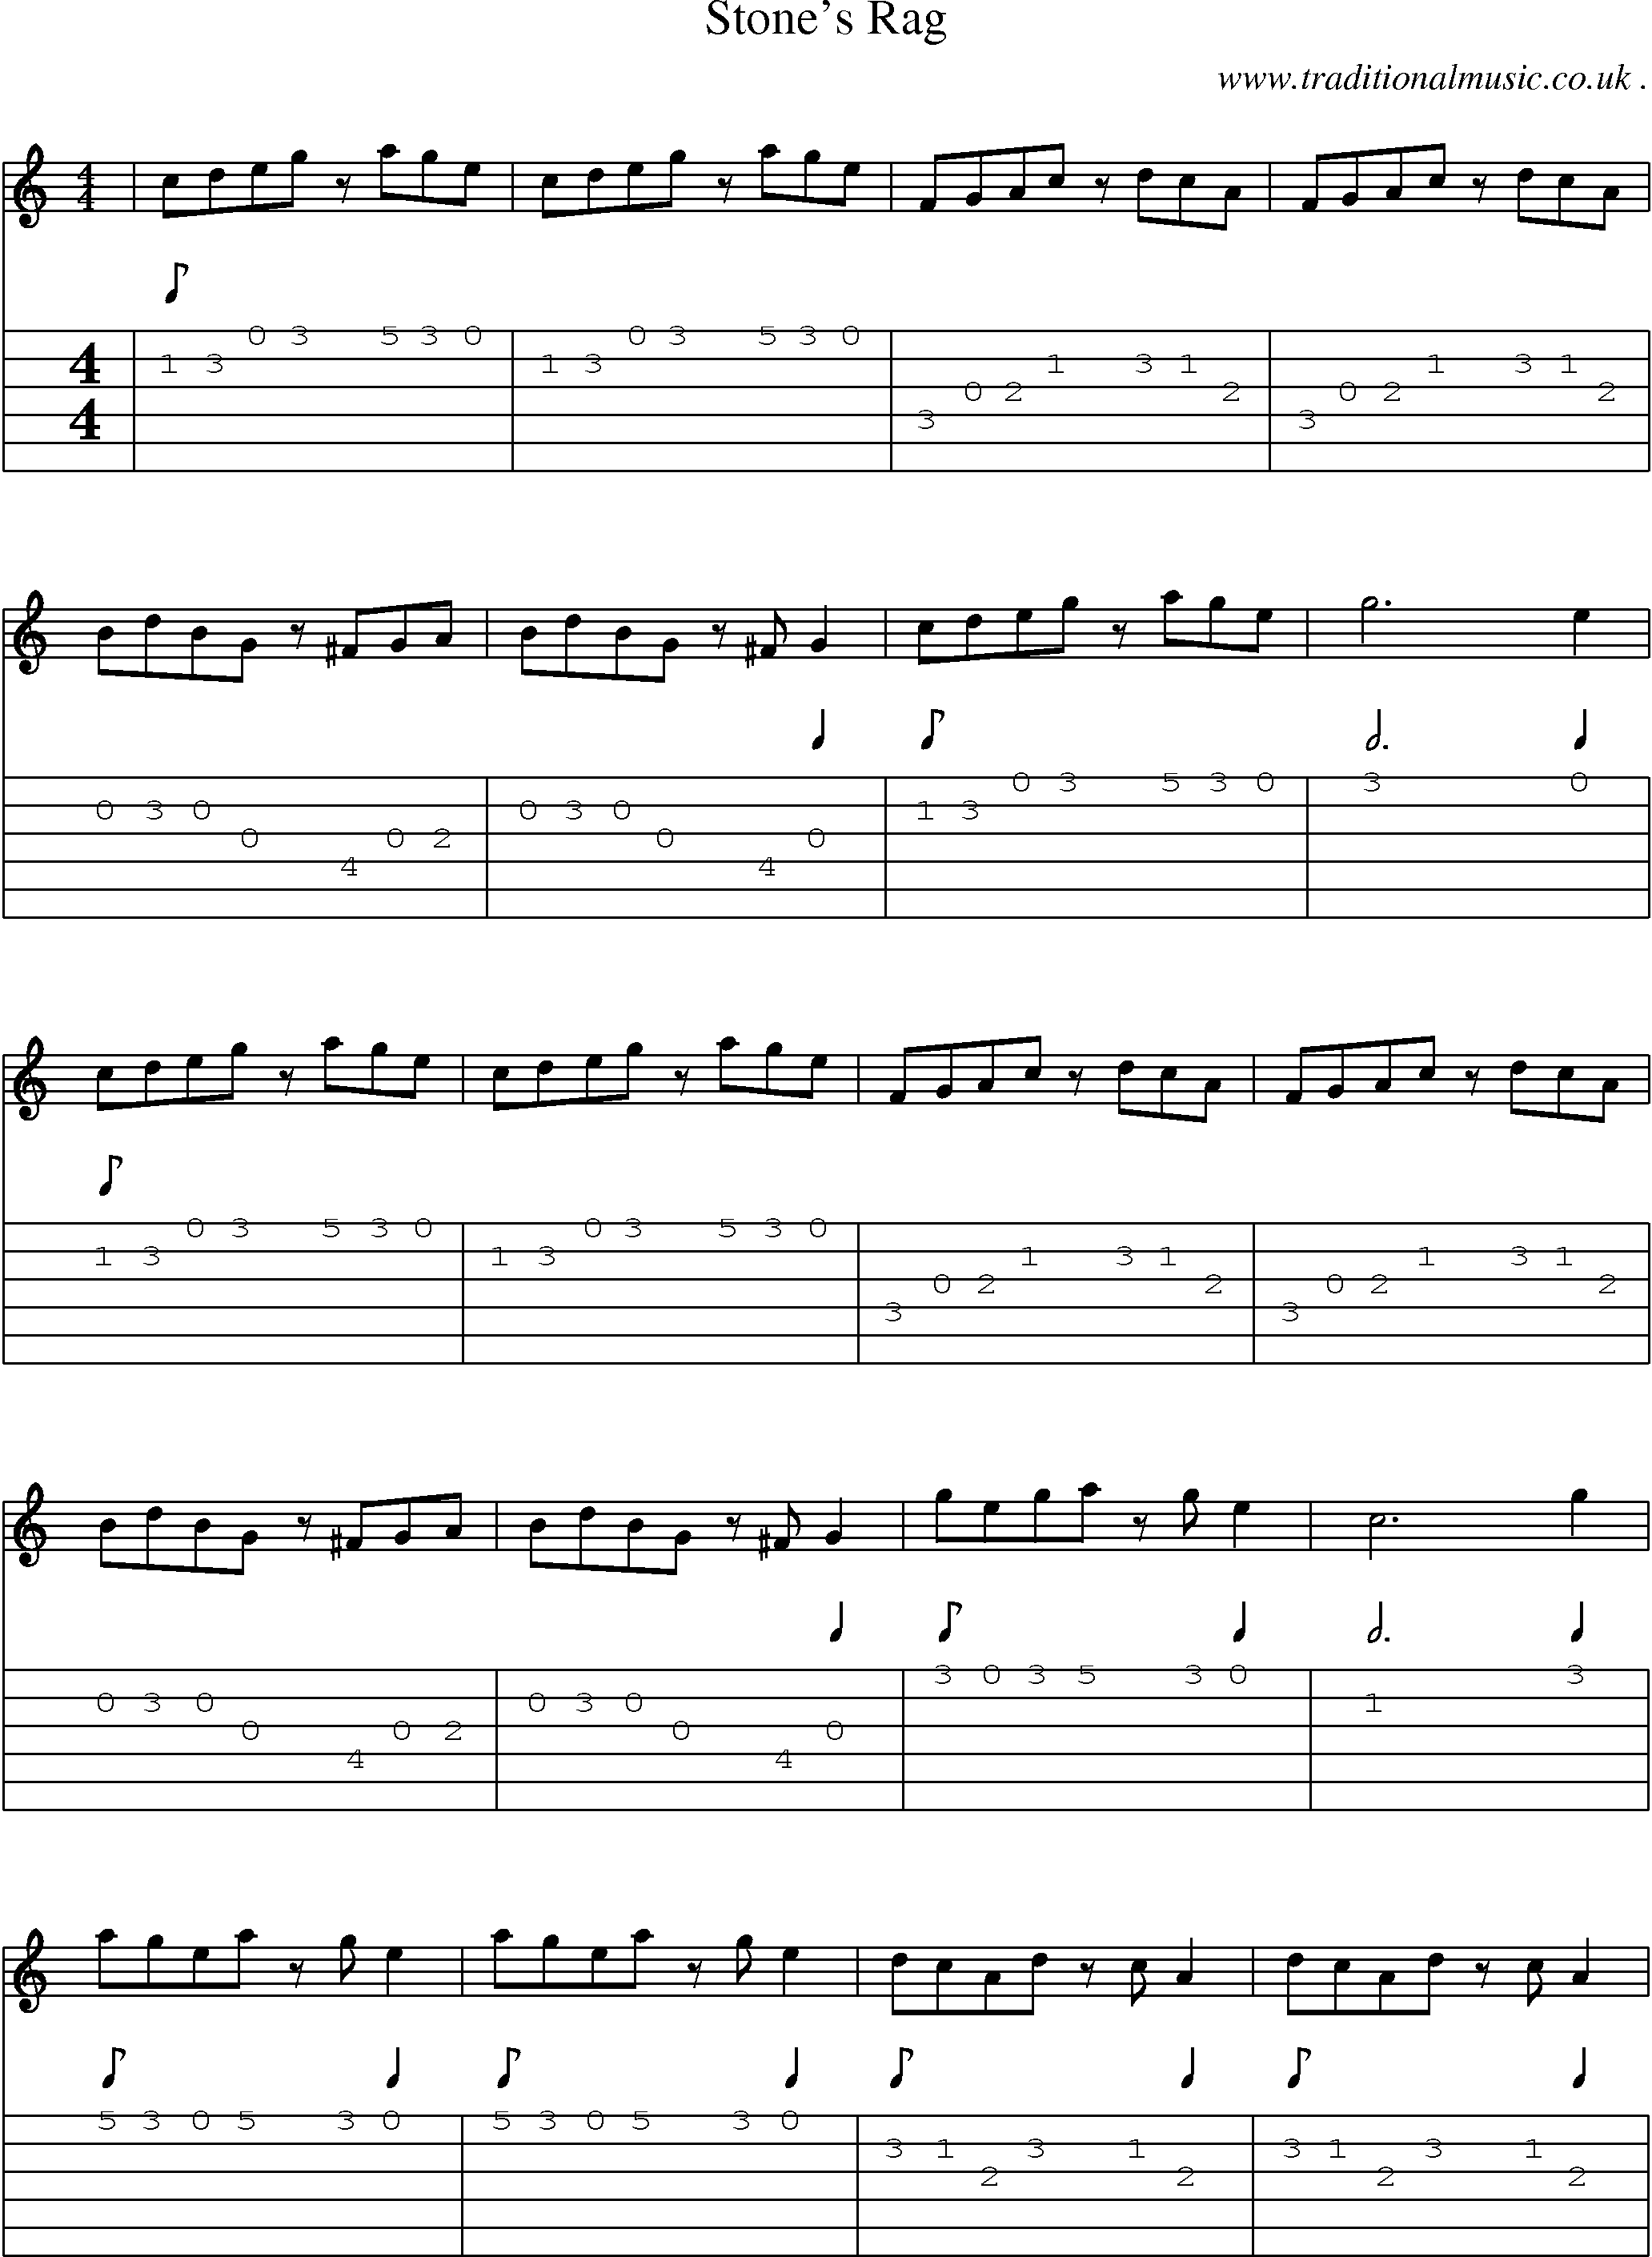 Music Score and Guitar Tabs for Stones Rag